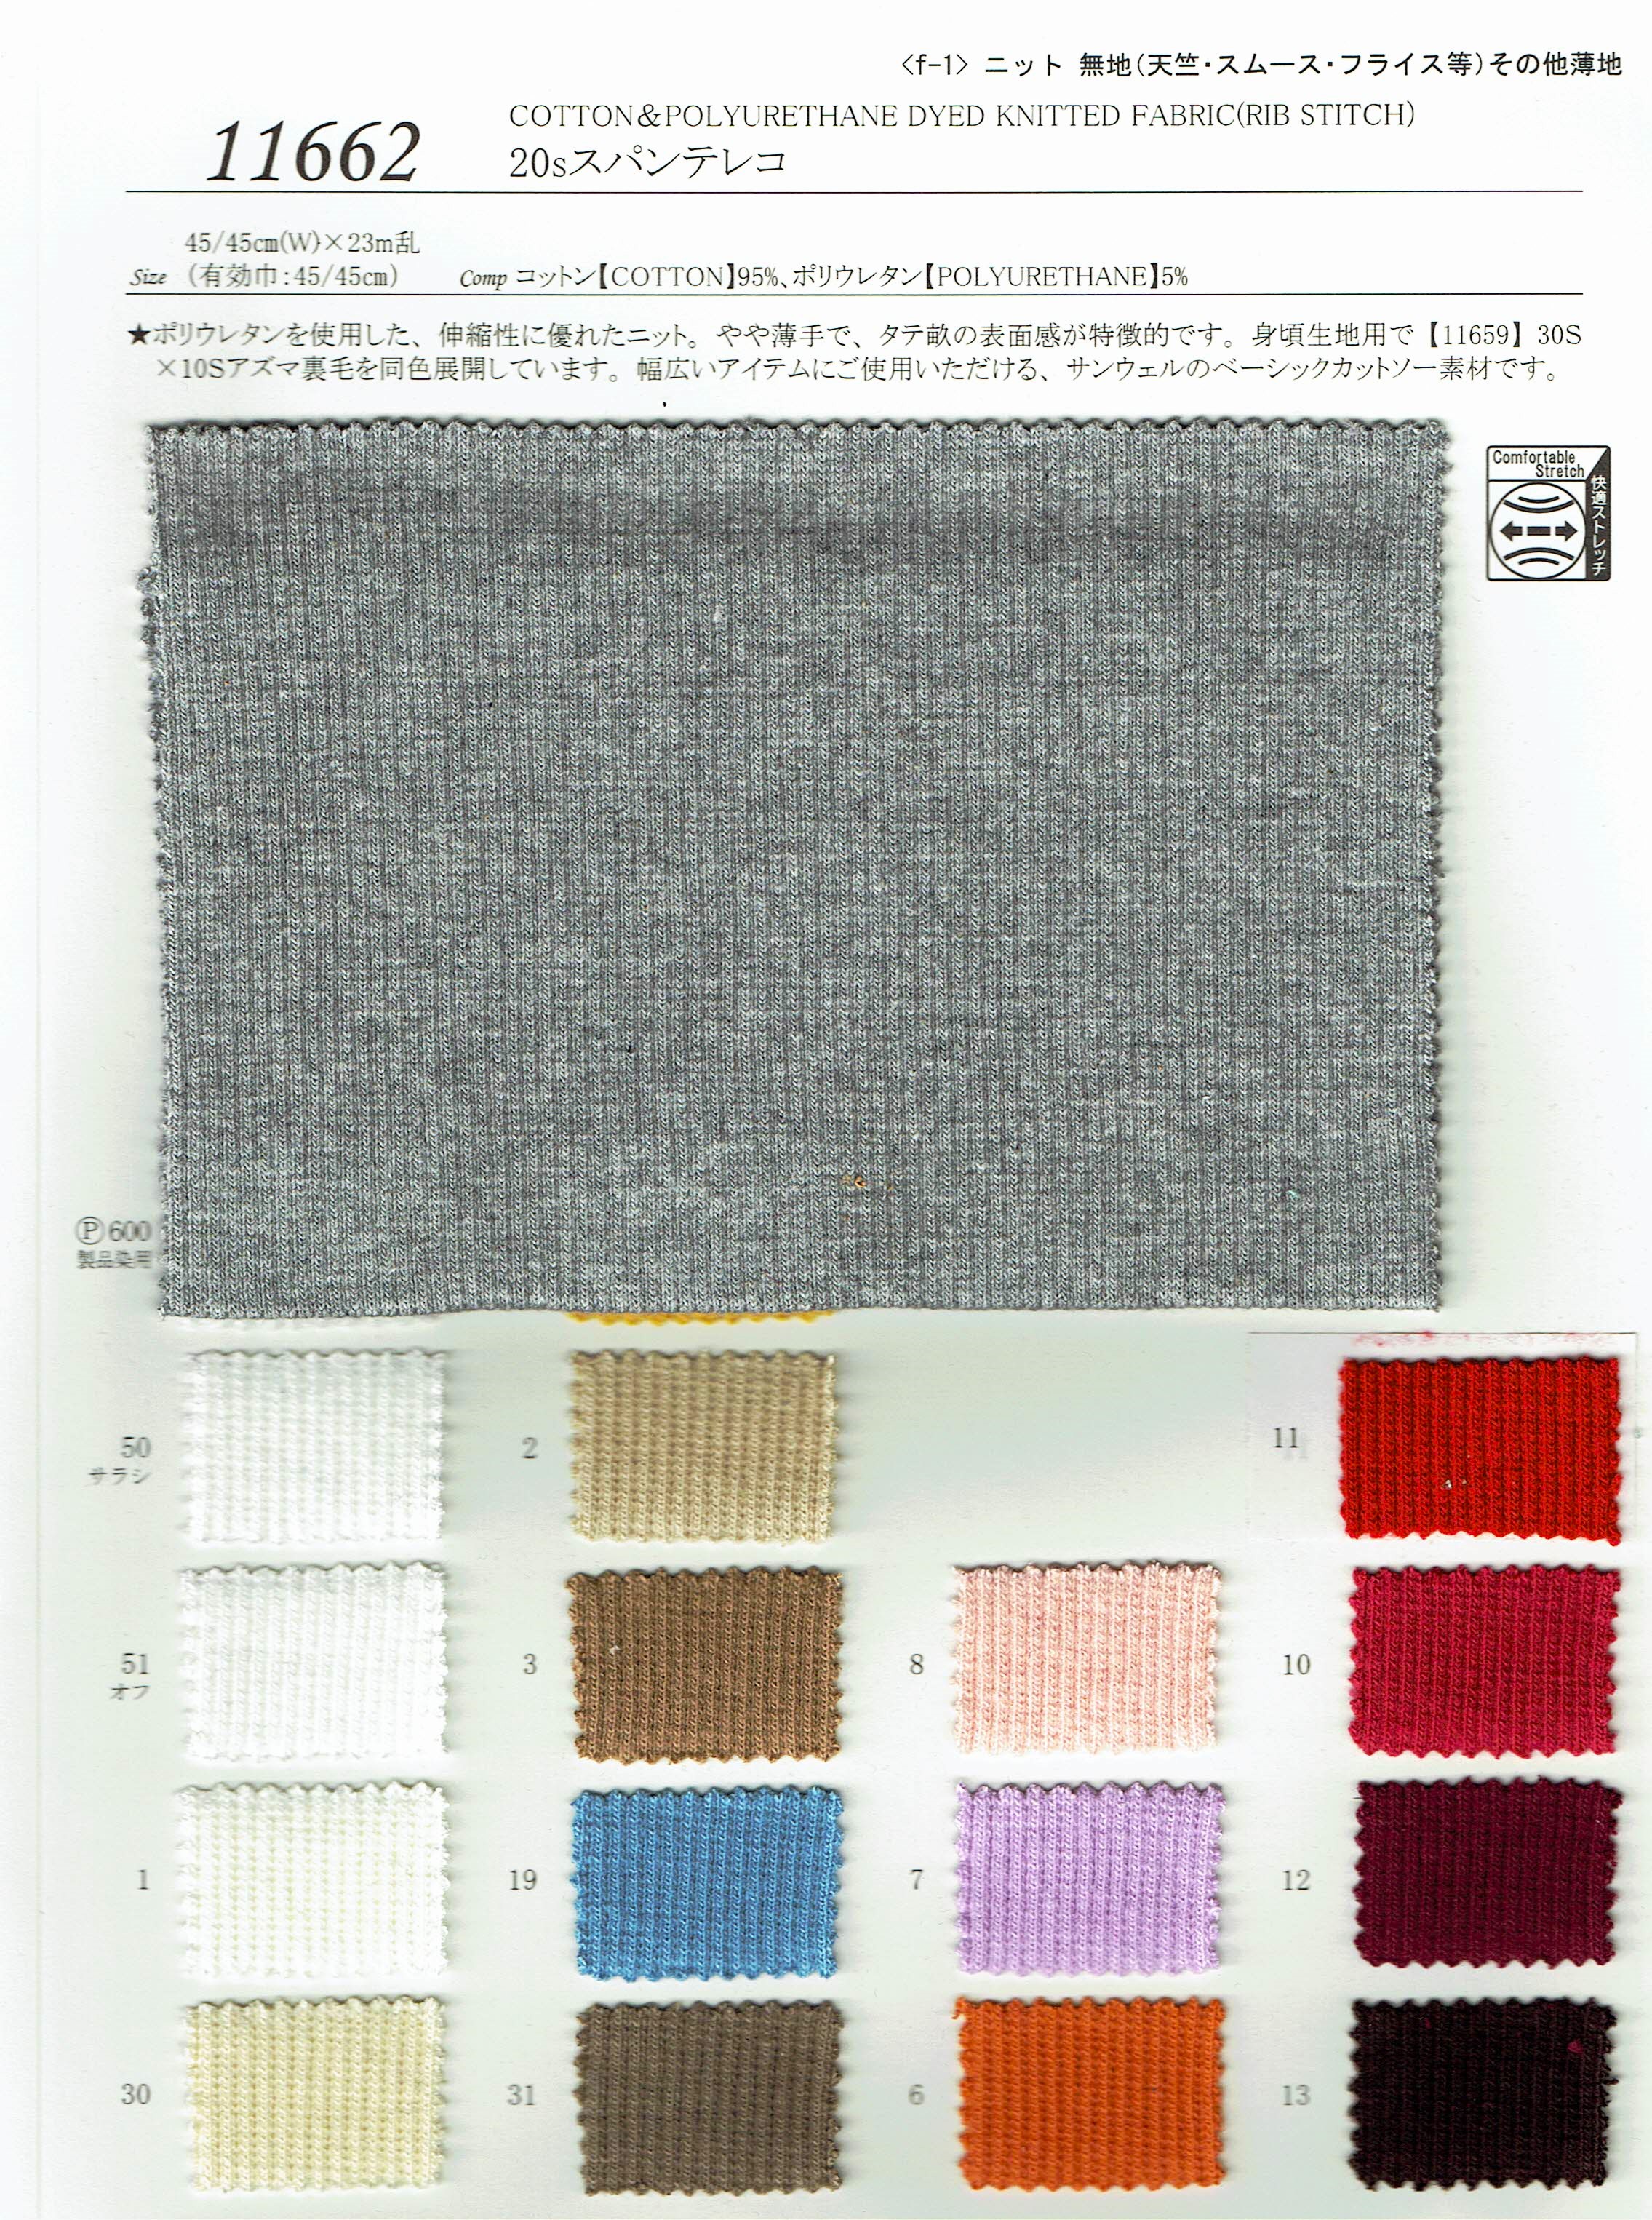 View COTTON95/POLYURETHANE5& DYED KNITTED FABRIC[RIB STITCH]& DYED KNITTED FABRIC[RIB STITCH]